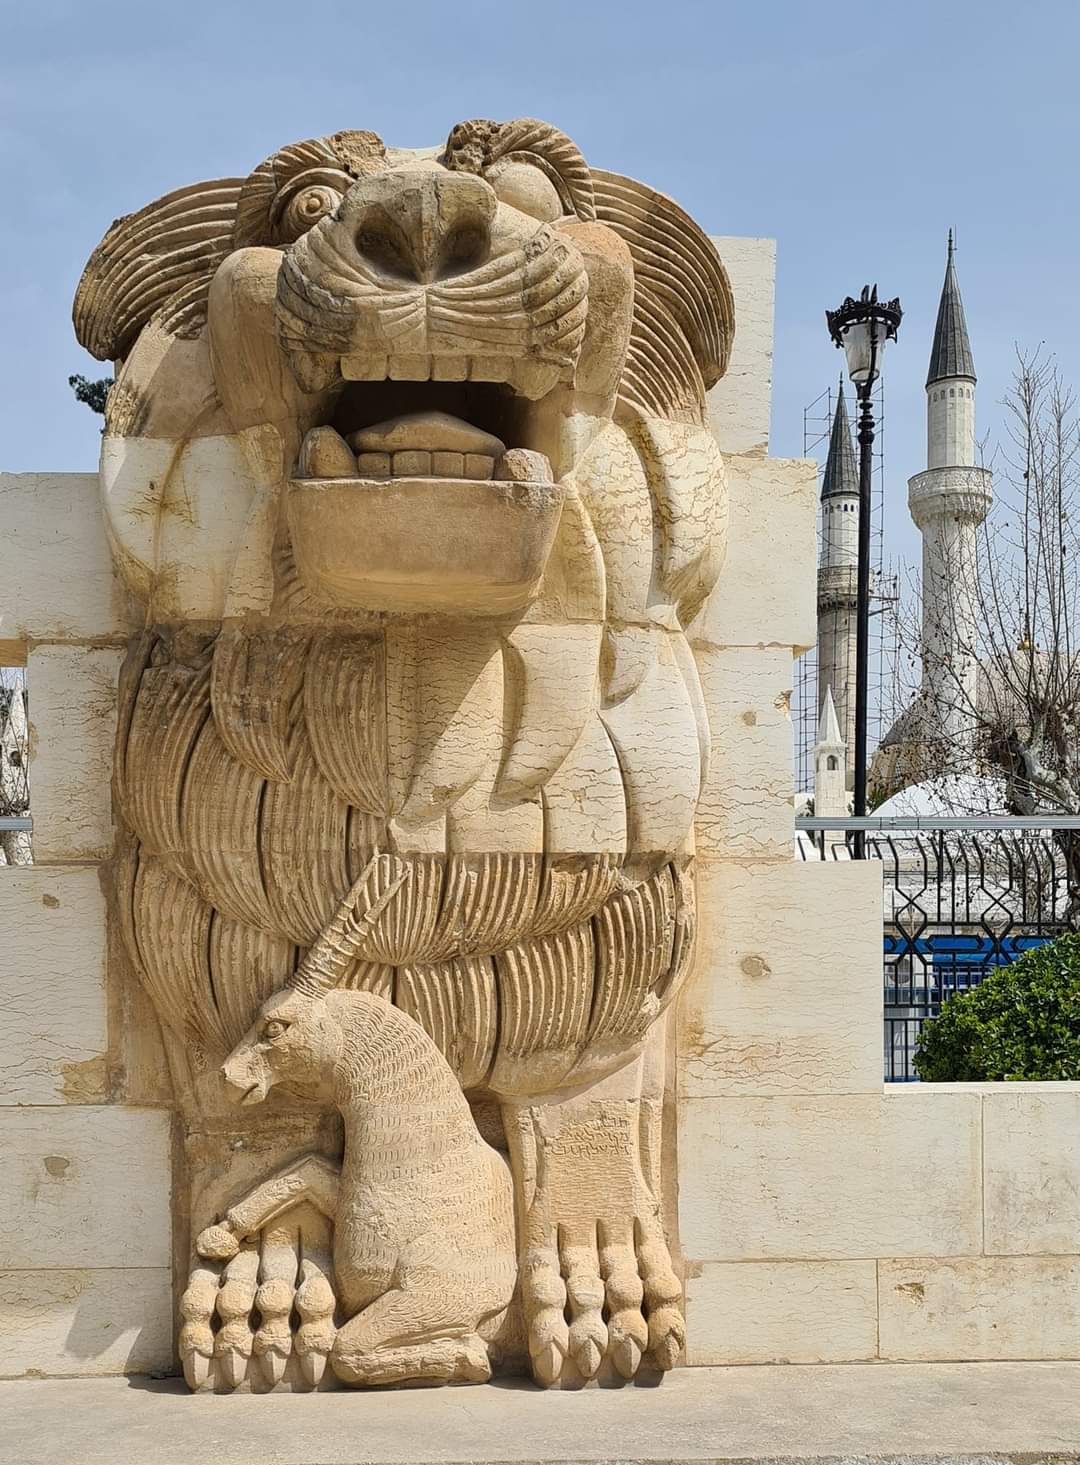 The restored lion of Al-lat at the National Museum, Damascus,Syria